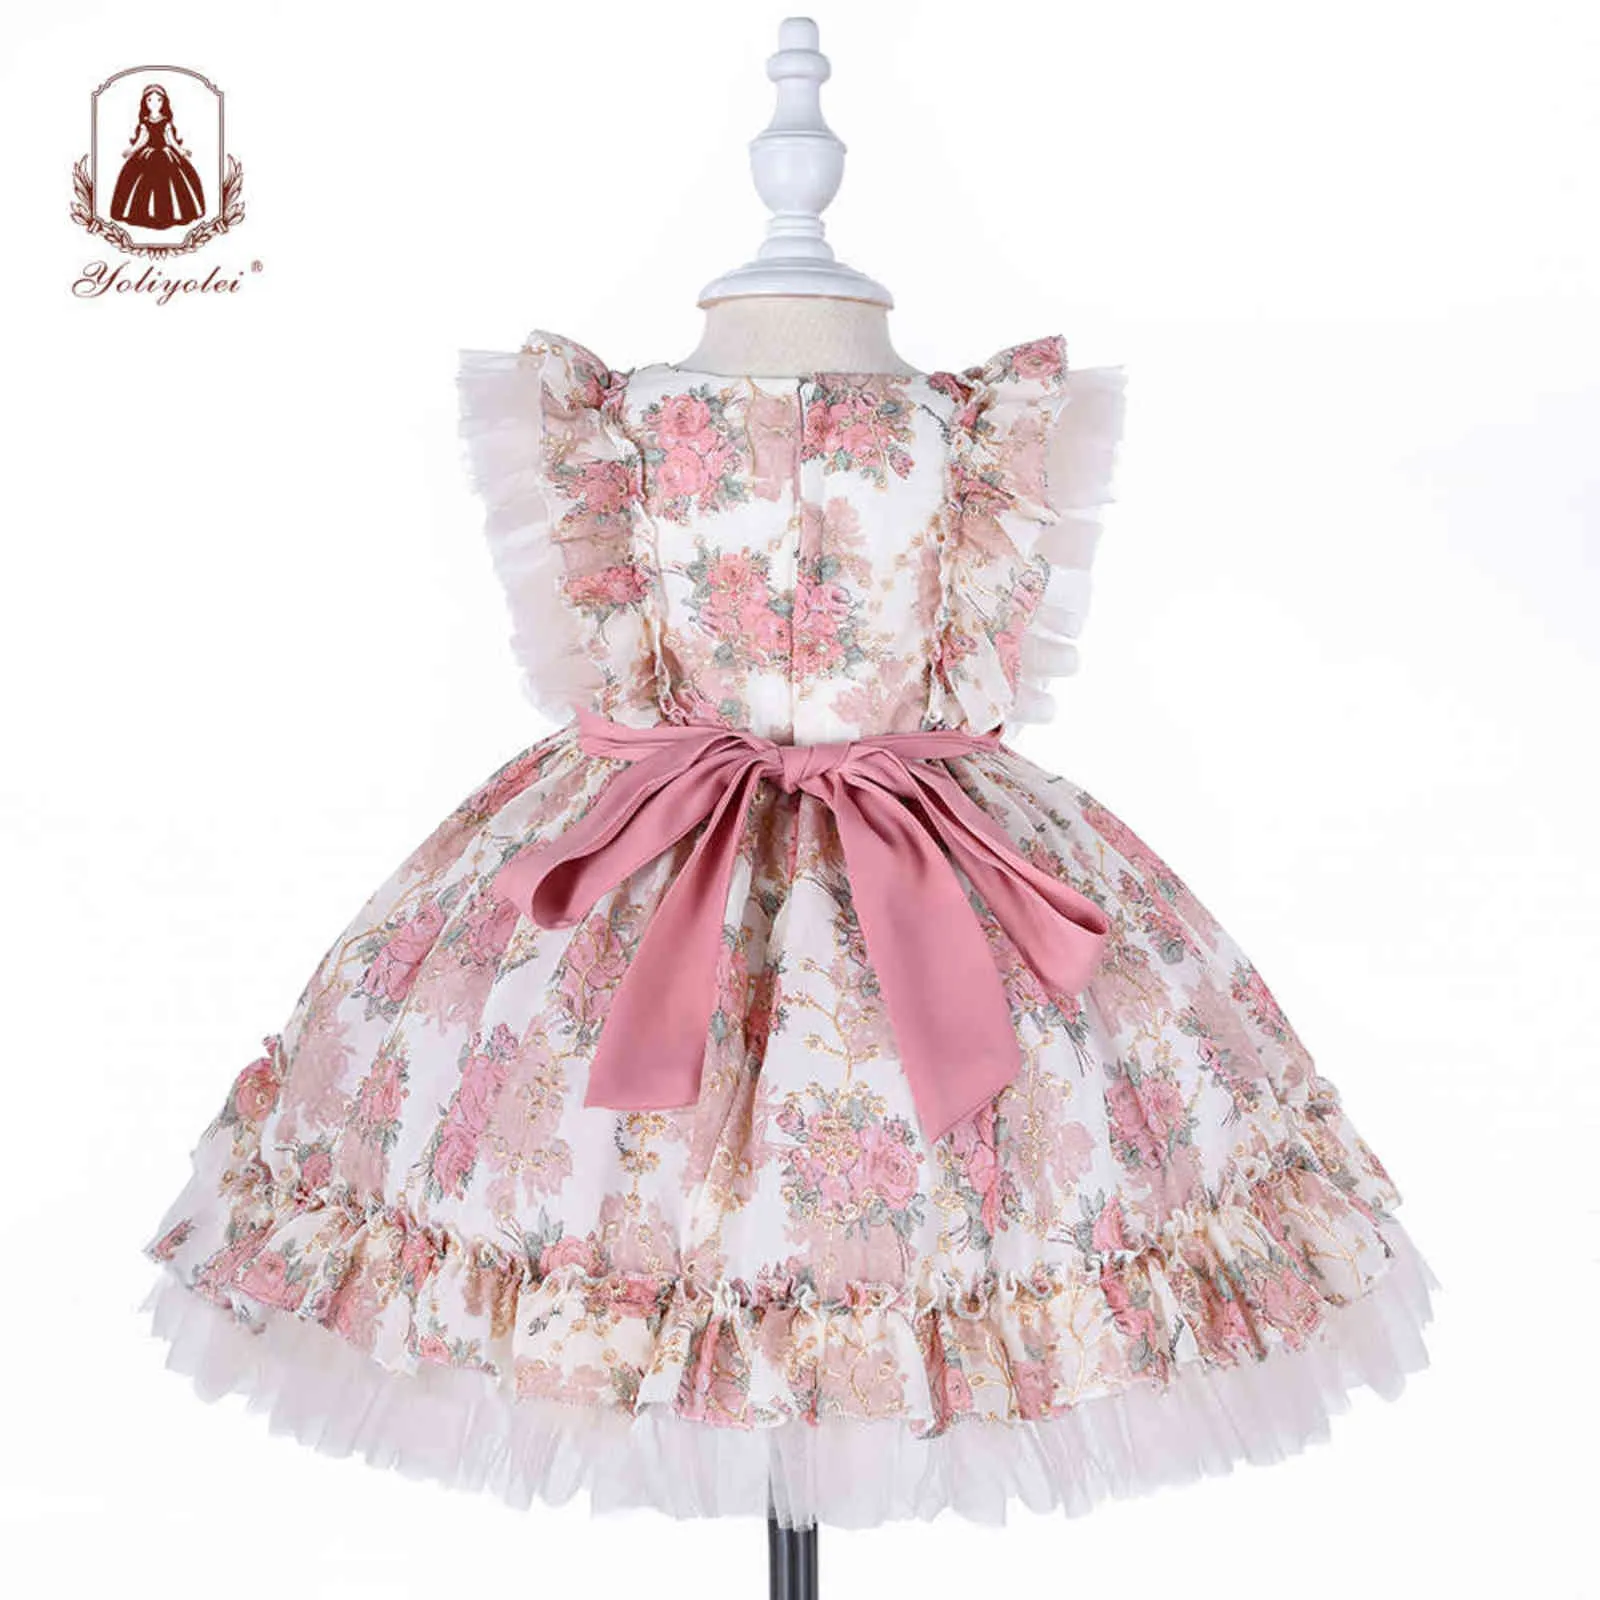 Yoliyolei Spanish Lolita Baby Dress Embroidery Girls Gowns Kids Child Princess 1st Birthday Party Clothes New Born Girls Dresses G1129